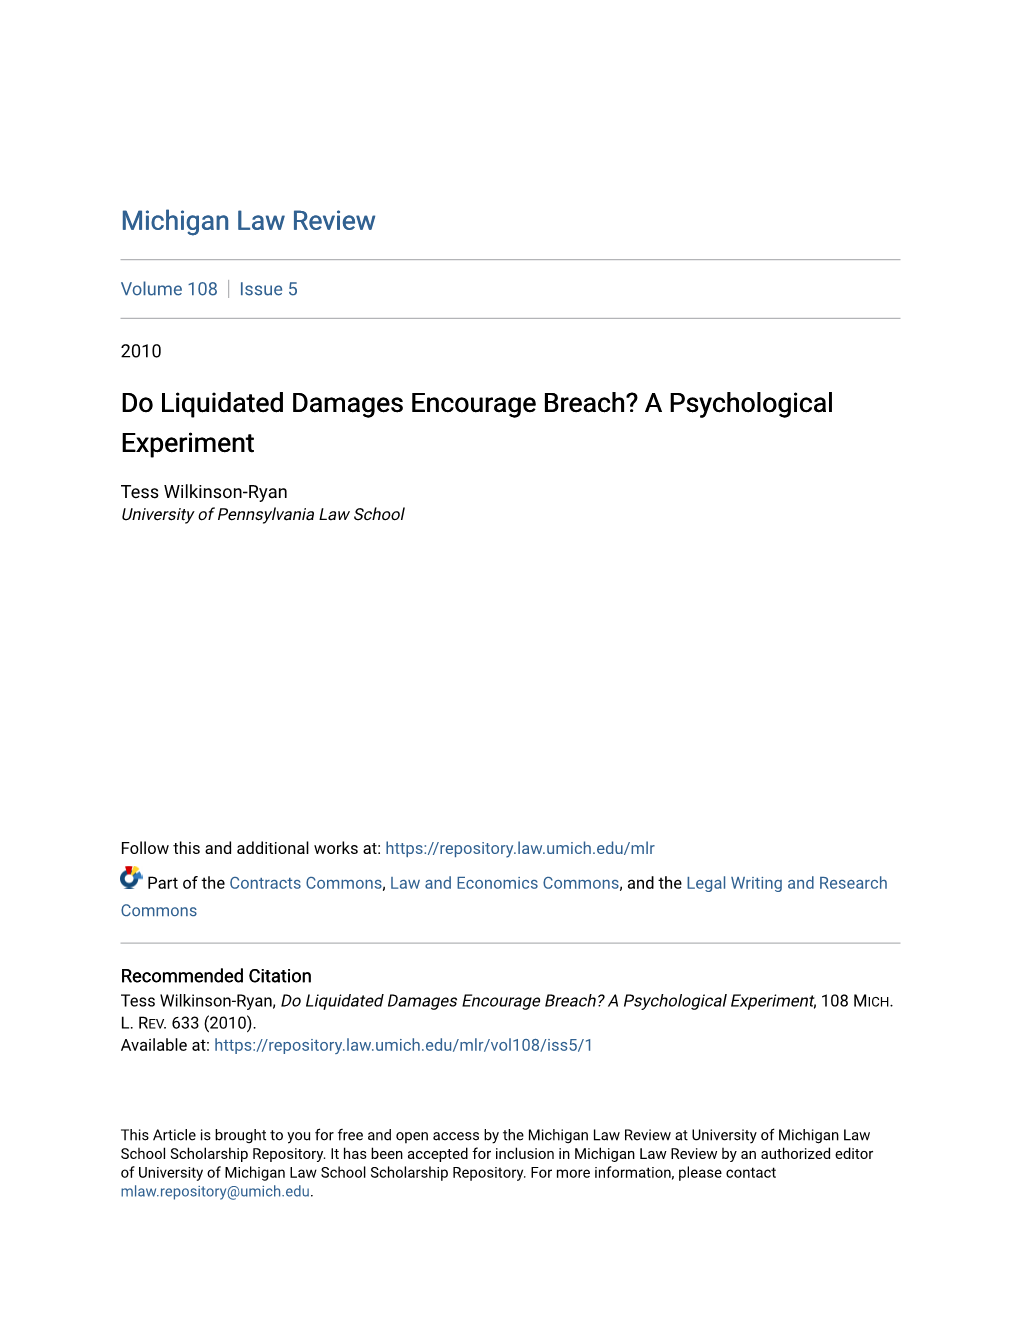 Do Liquidated Damages Encourage Breach? a Psychological Experiment